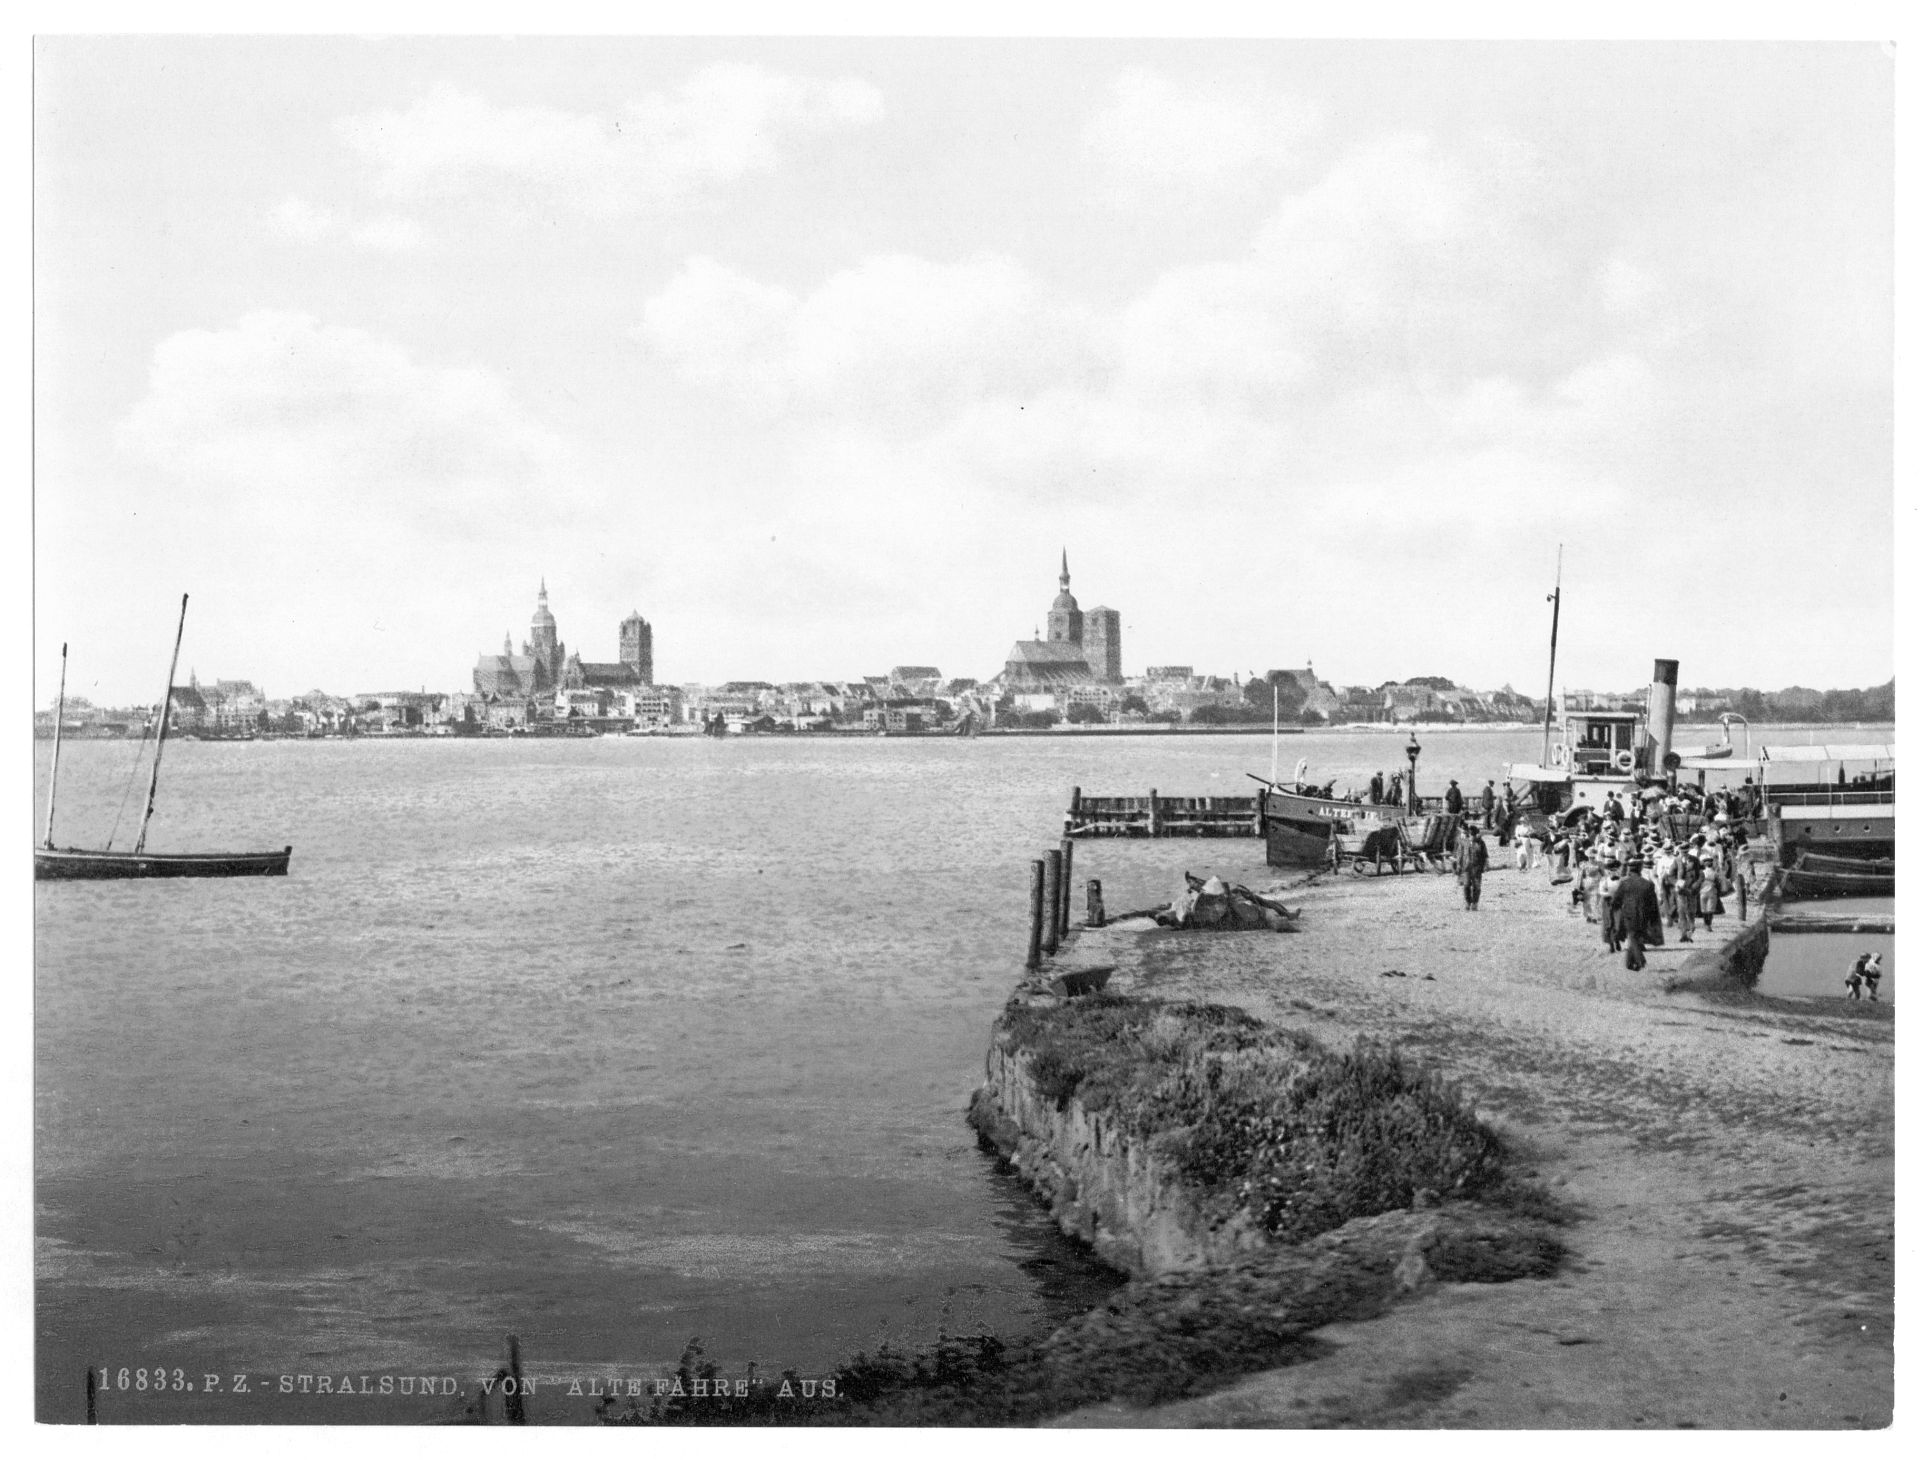 General view, from the "Alte Fahre", Stralsund, Pomerania, Germany